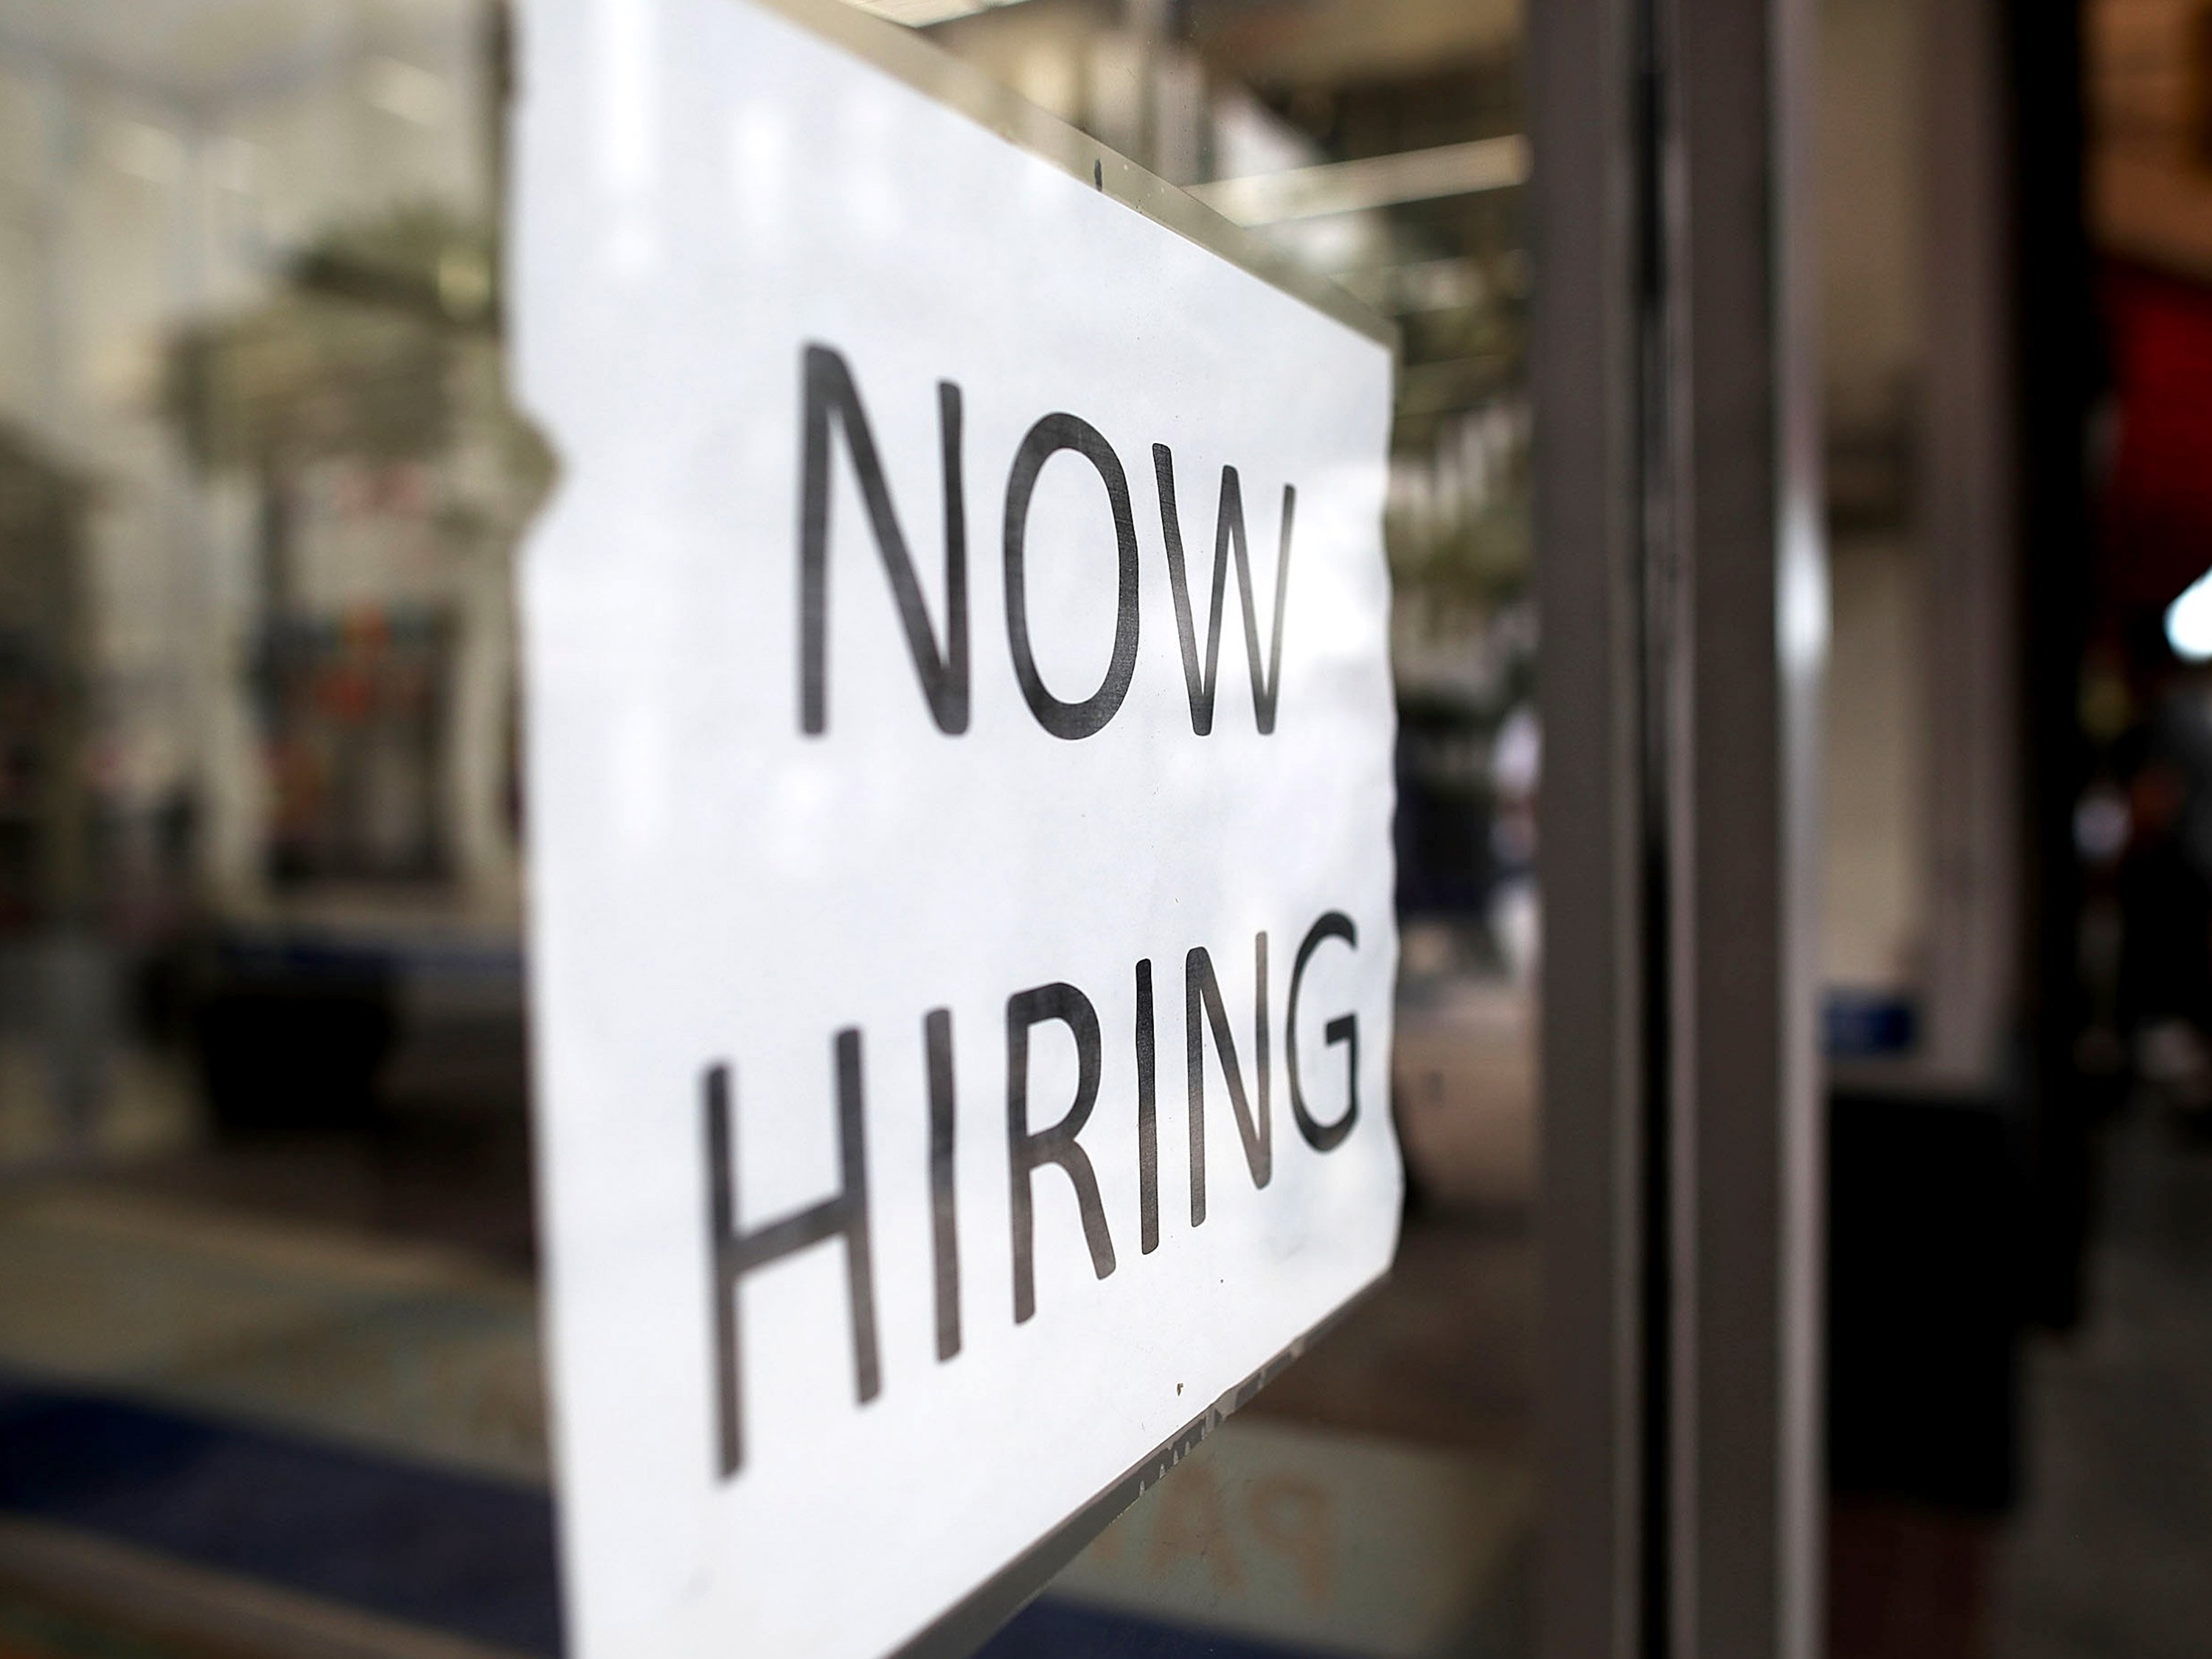 US: 201,000 jobs added in Aug, unemployment at 3.9%